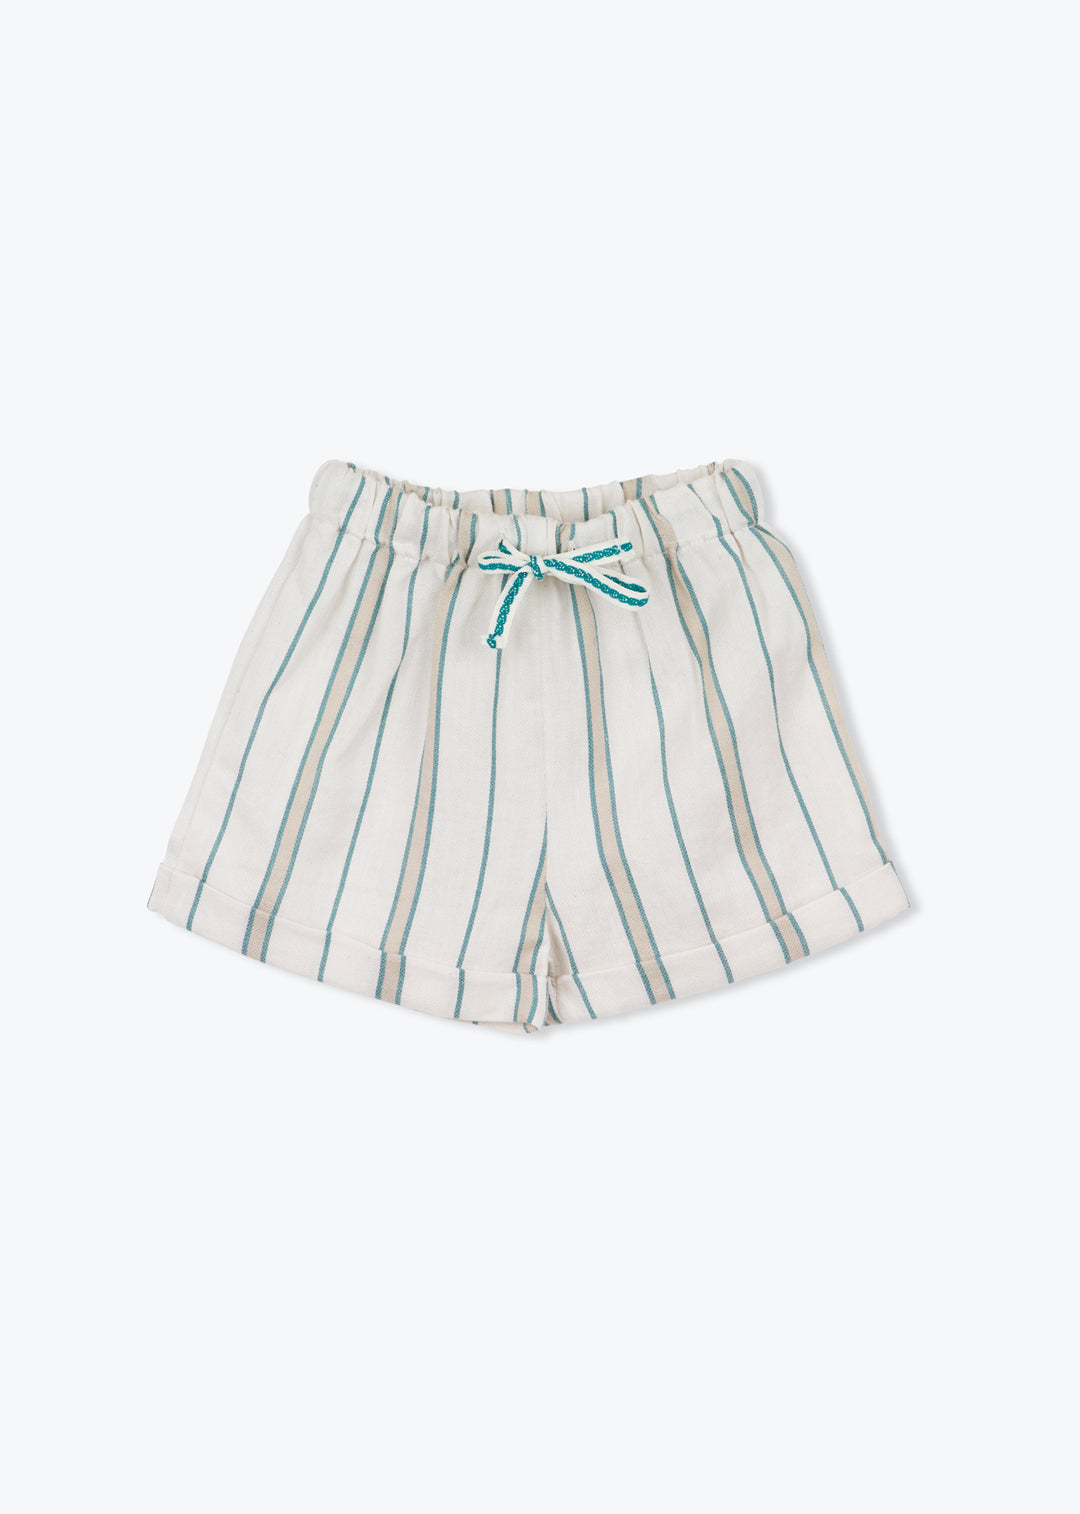 Shorts Scratches Baby Boy Fidy Green - قميص